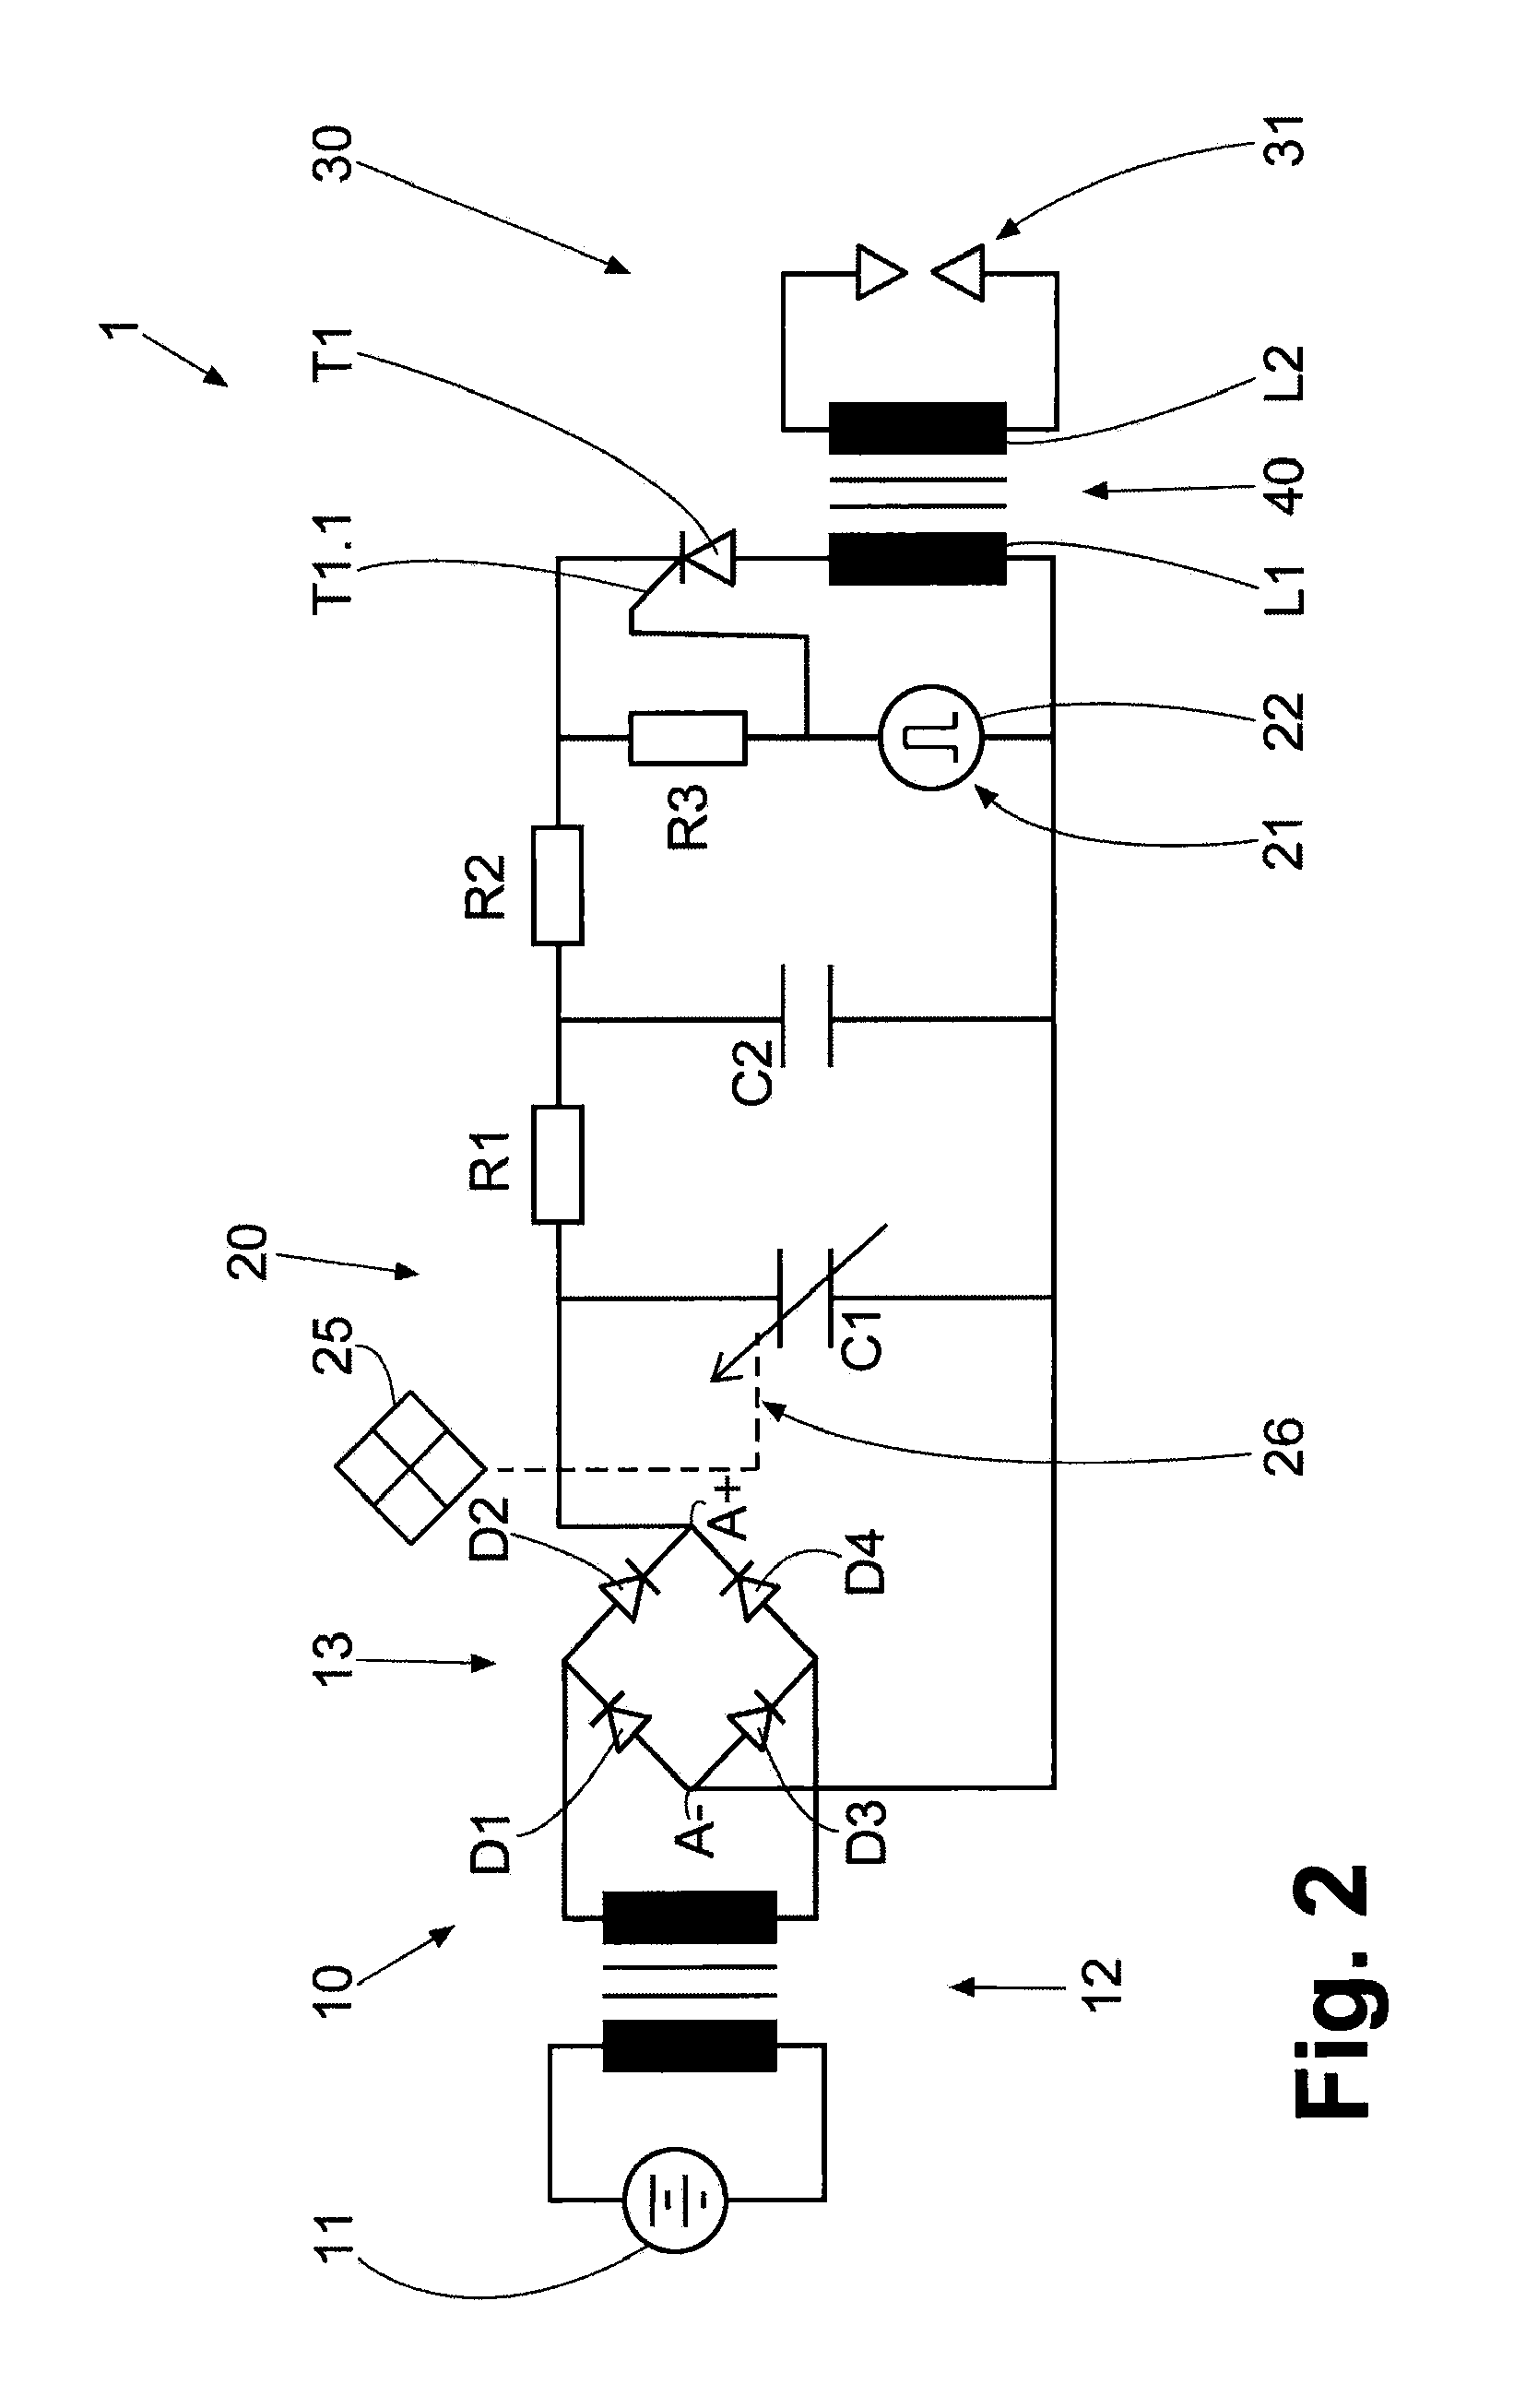 Capacitive Ignition System